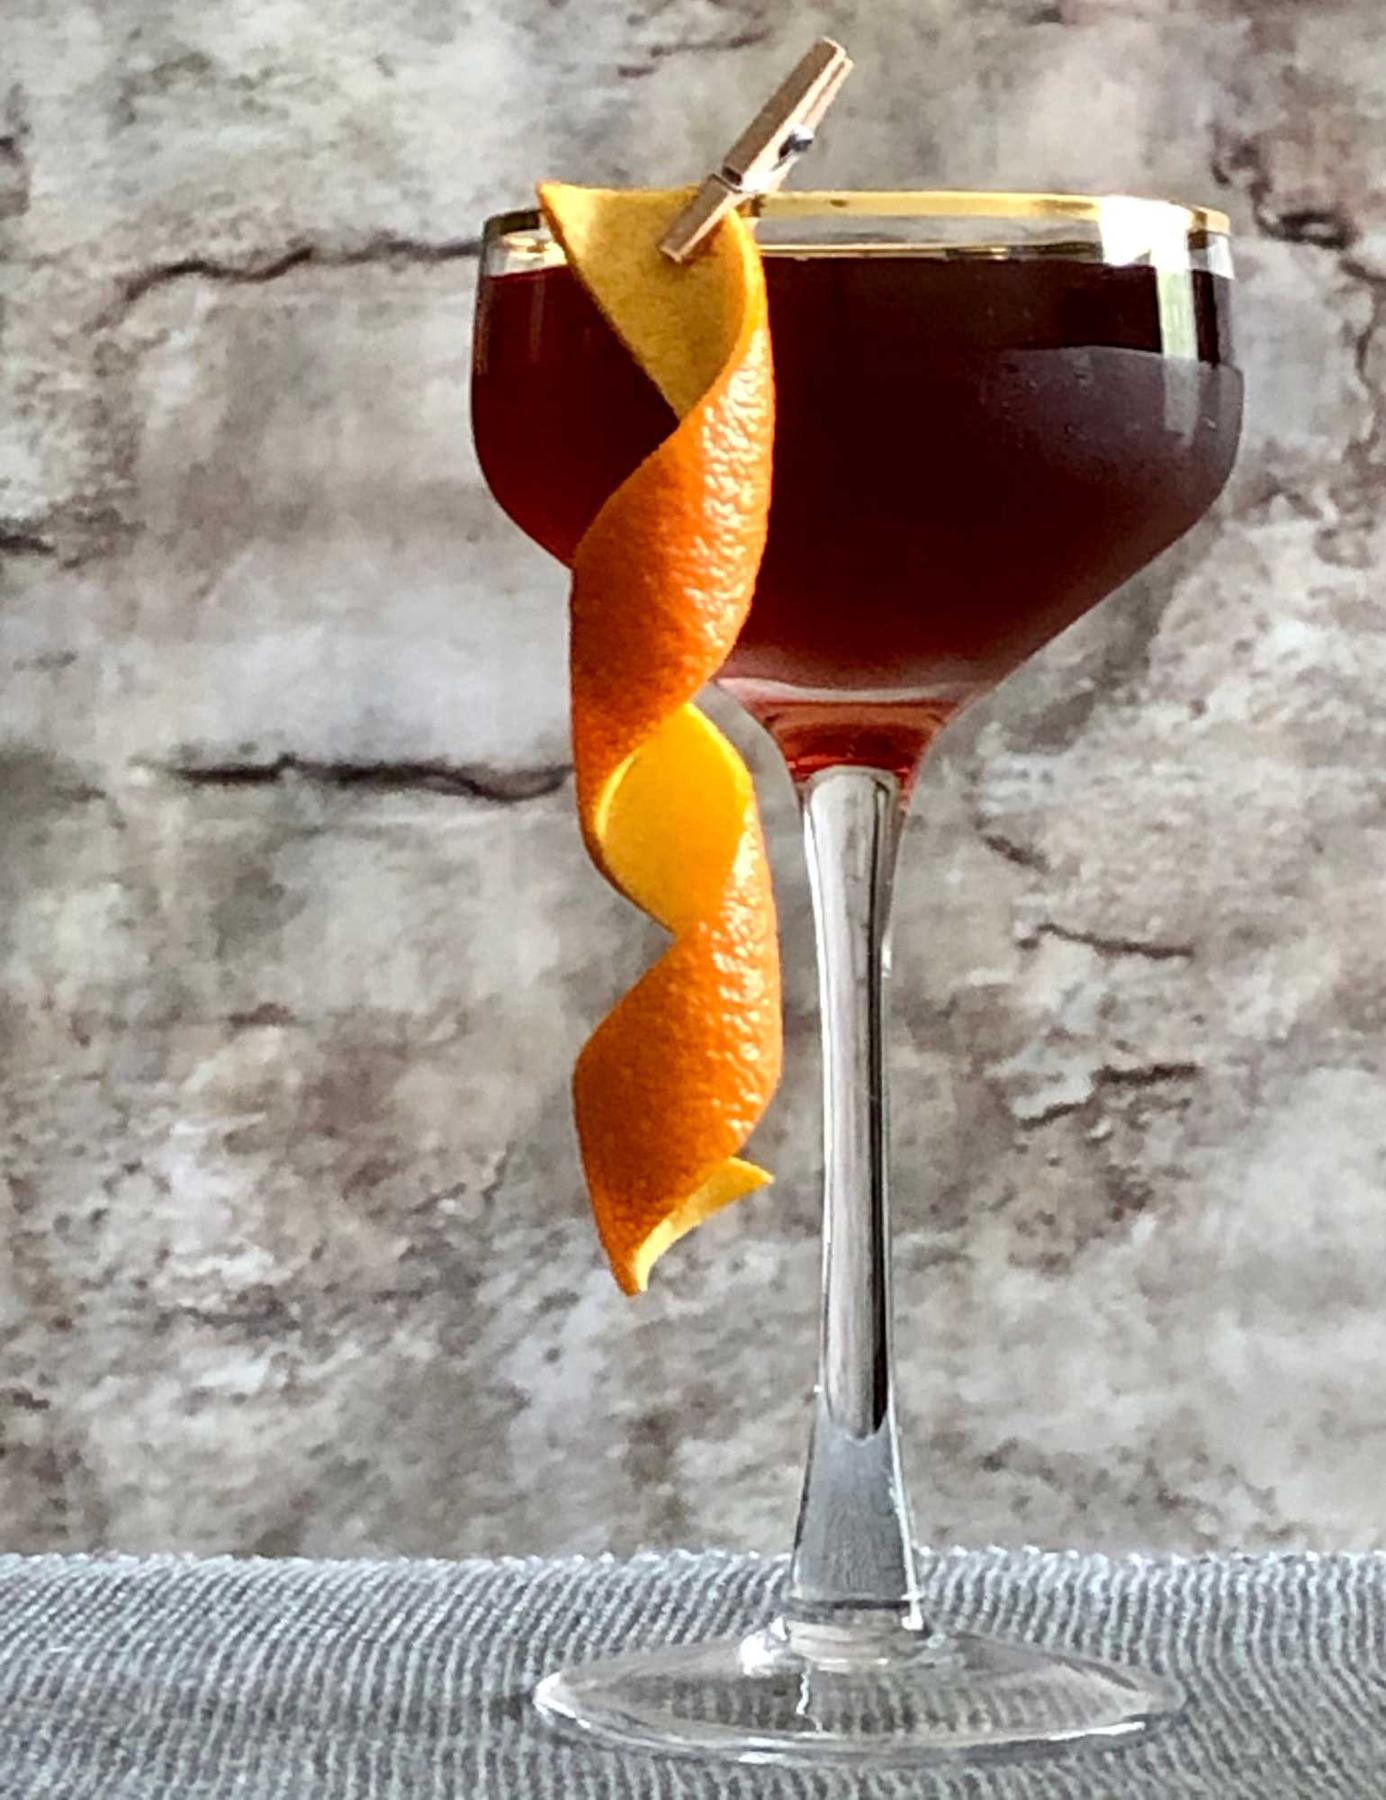 An example of the The Charleston, the mixed drink (drink) featuring bourbon whiskey, Henriques & Henriques Rainwater Madeira, Henriques & Henriques Generoso Doce 5 Year Old Madeira, Angostura bitters, and orange twist; photo by Lee Edwards